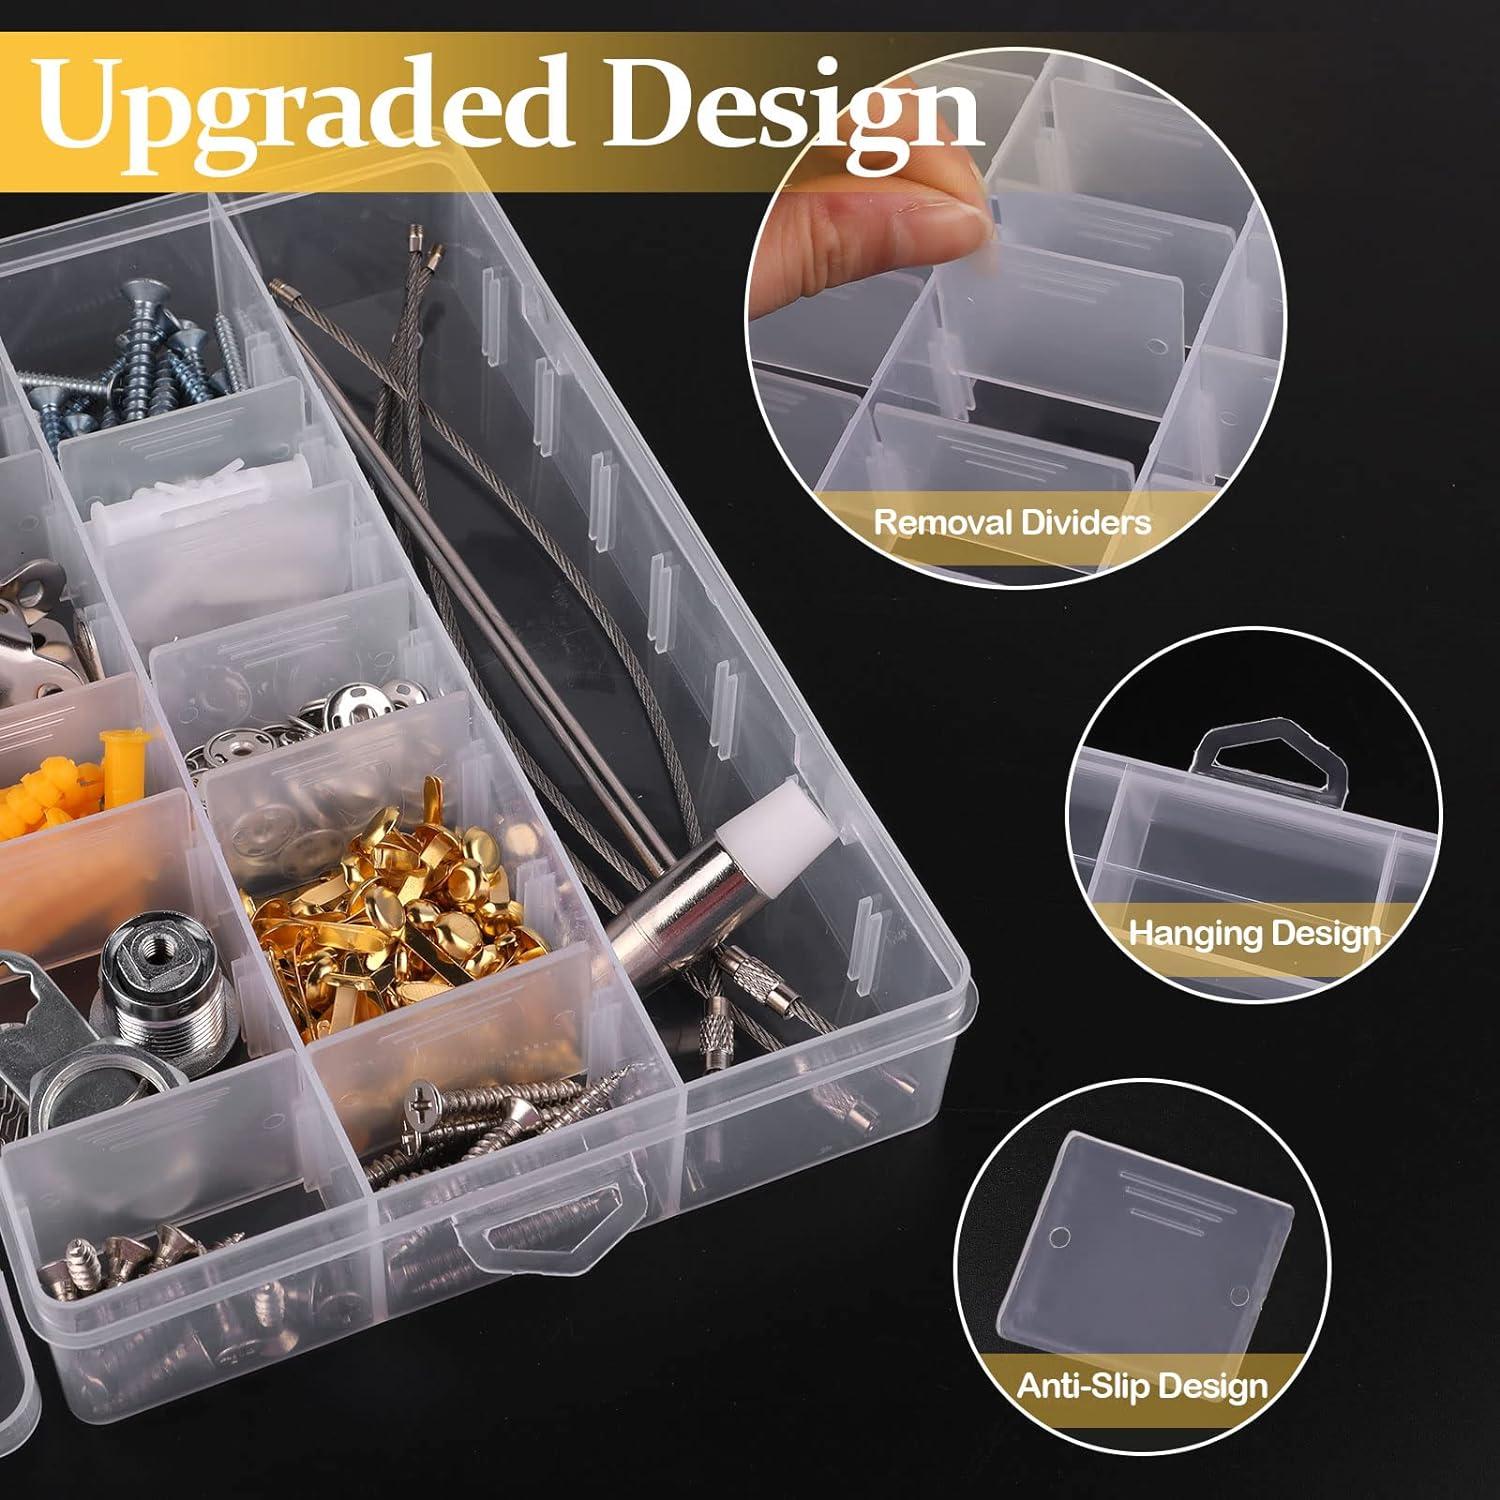 Transparent Plastic Storage Box 8 Grids Portable Organizer Box with  Adjustable Dividers Clear Crafts and Jewelry Storage Box for Beads Earring